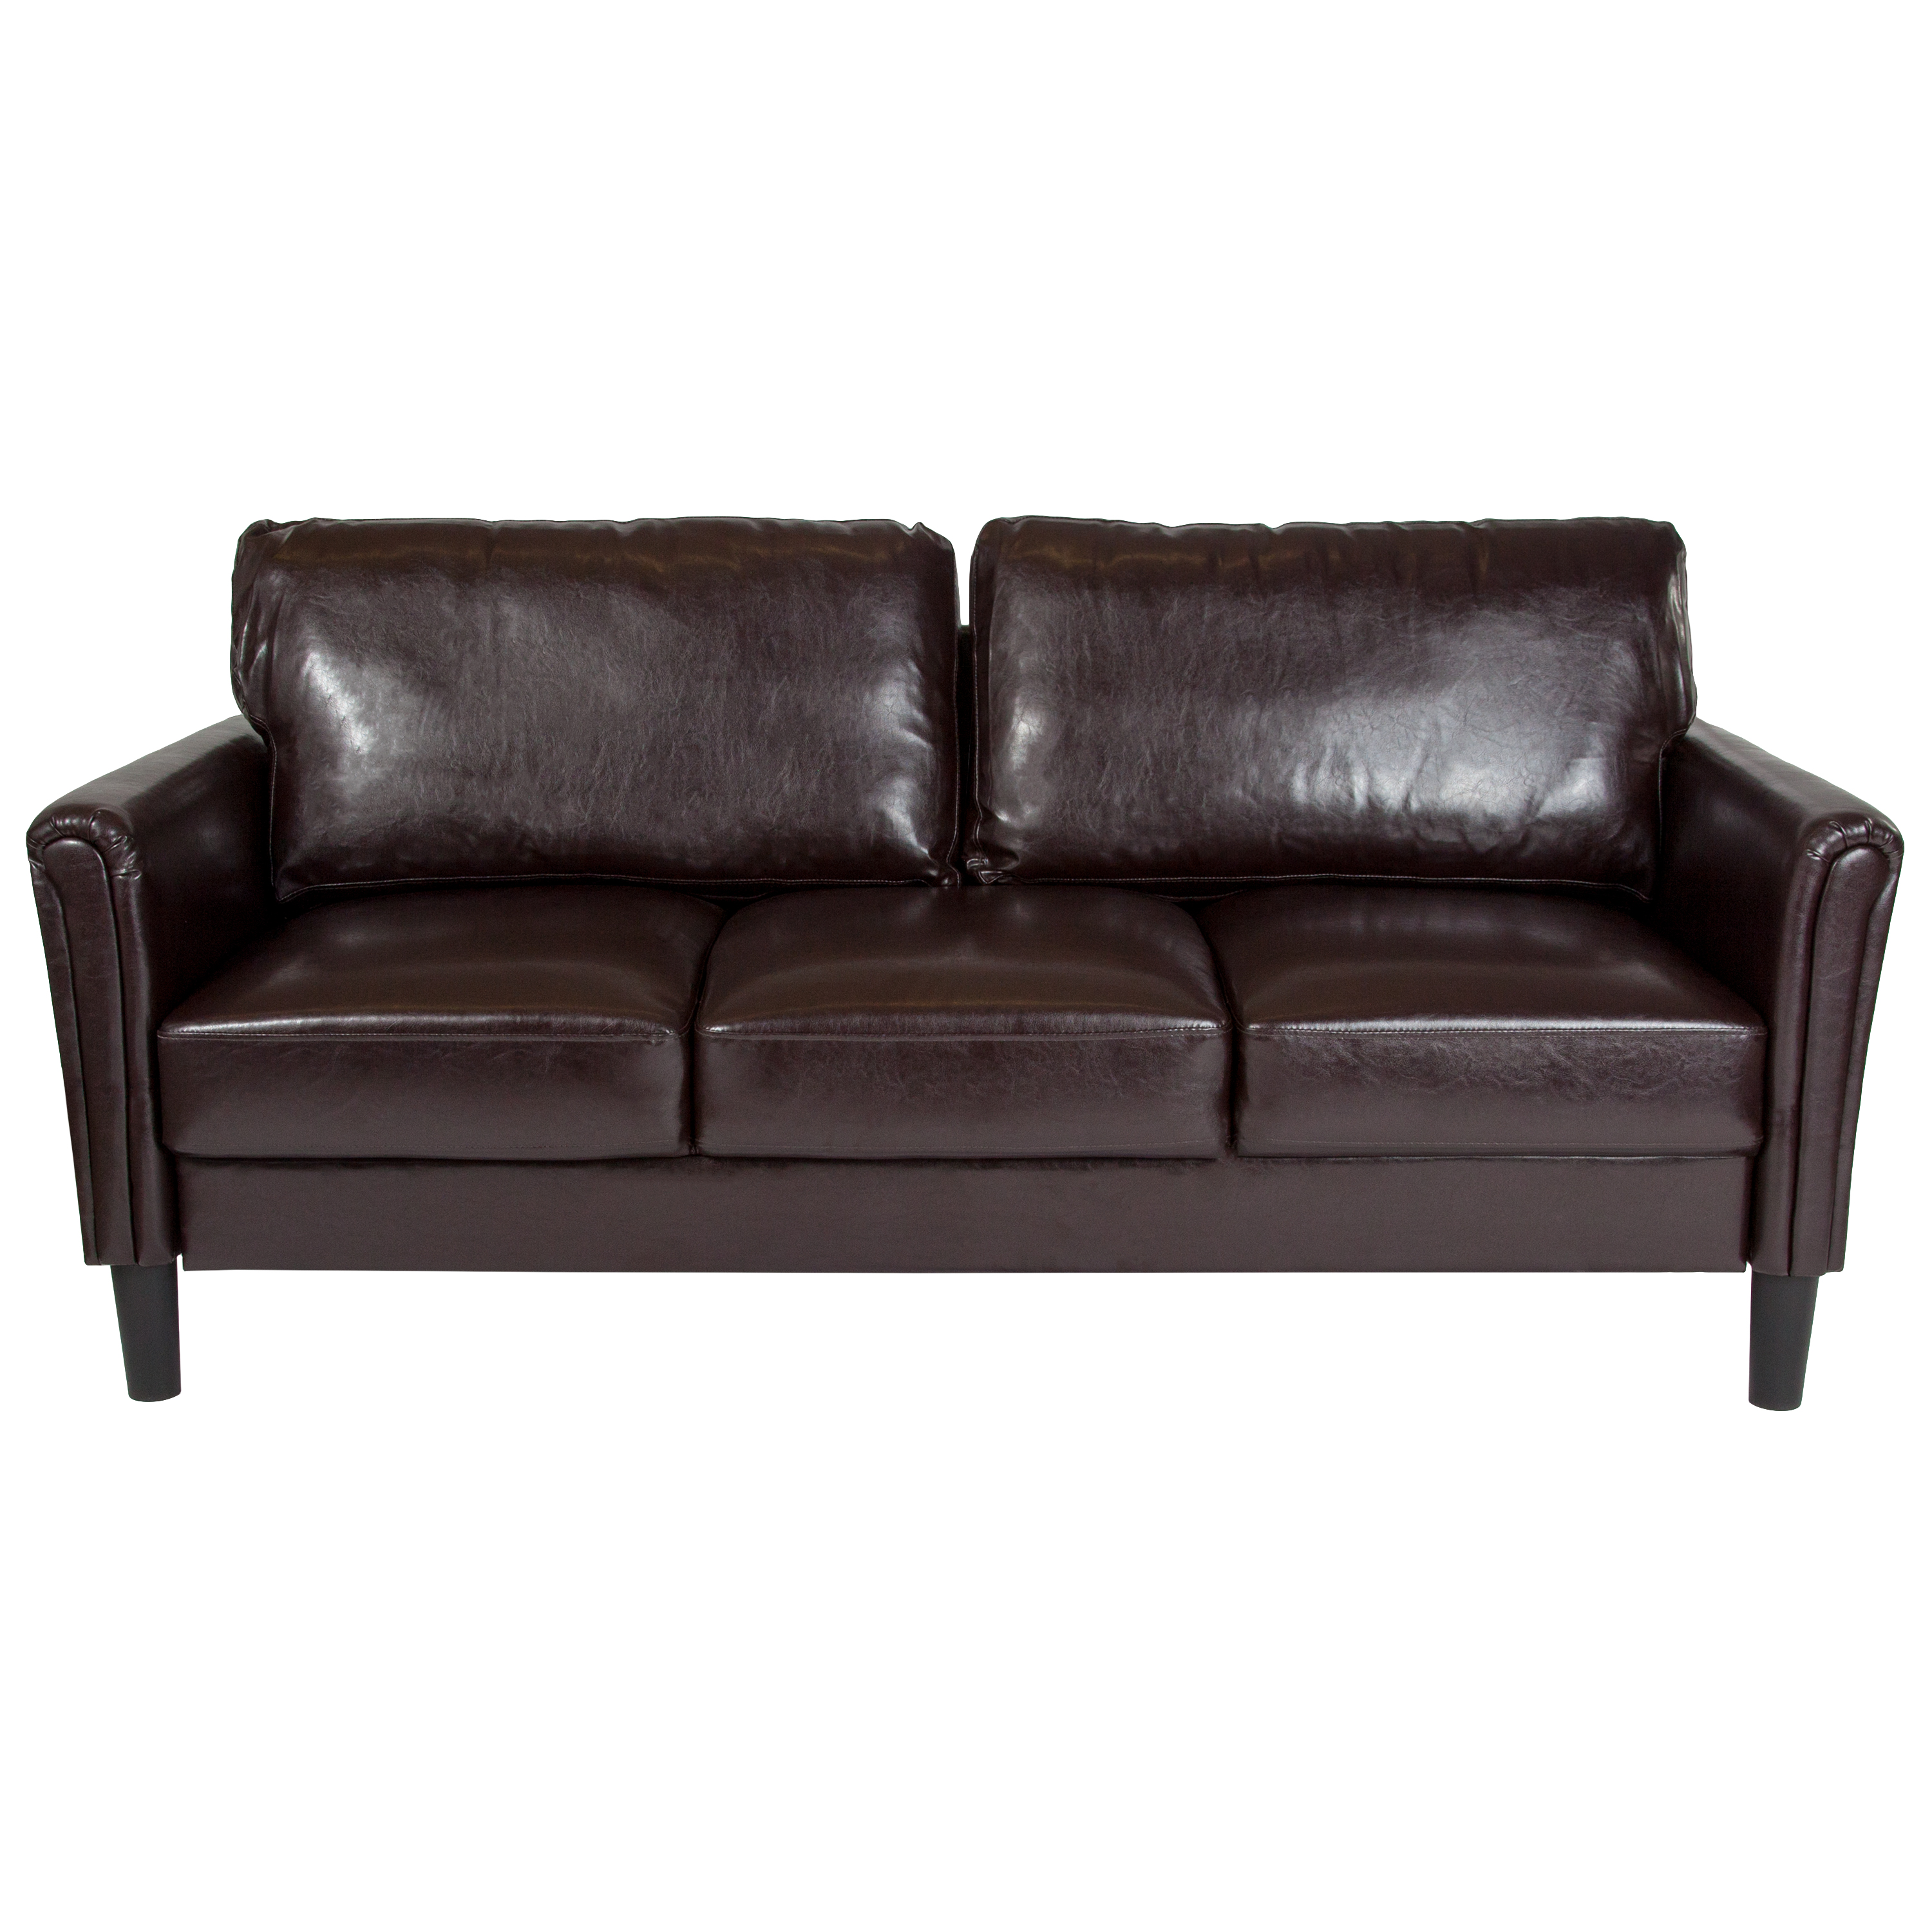 Flash Furniture Upholstered Living Room Sofa with Tailored Arms in Brown LeatherSoft - image 5 of 5